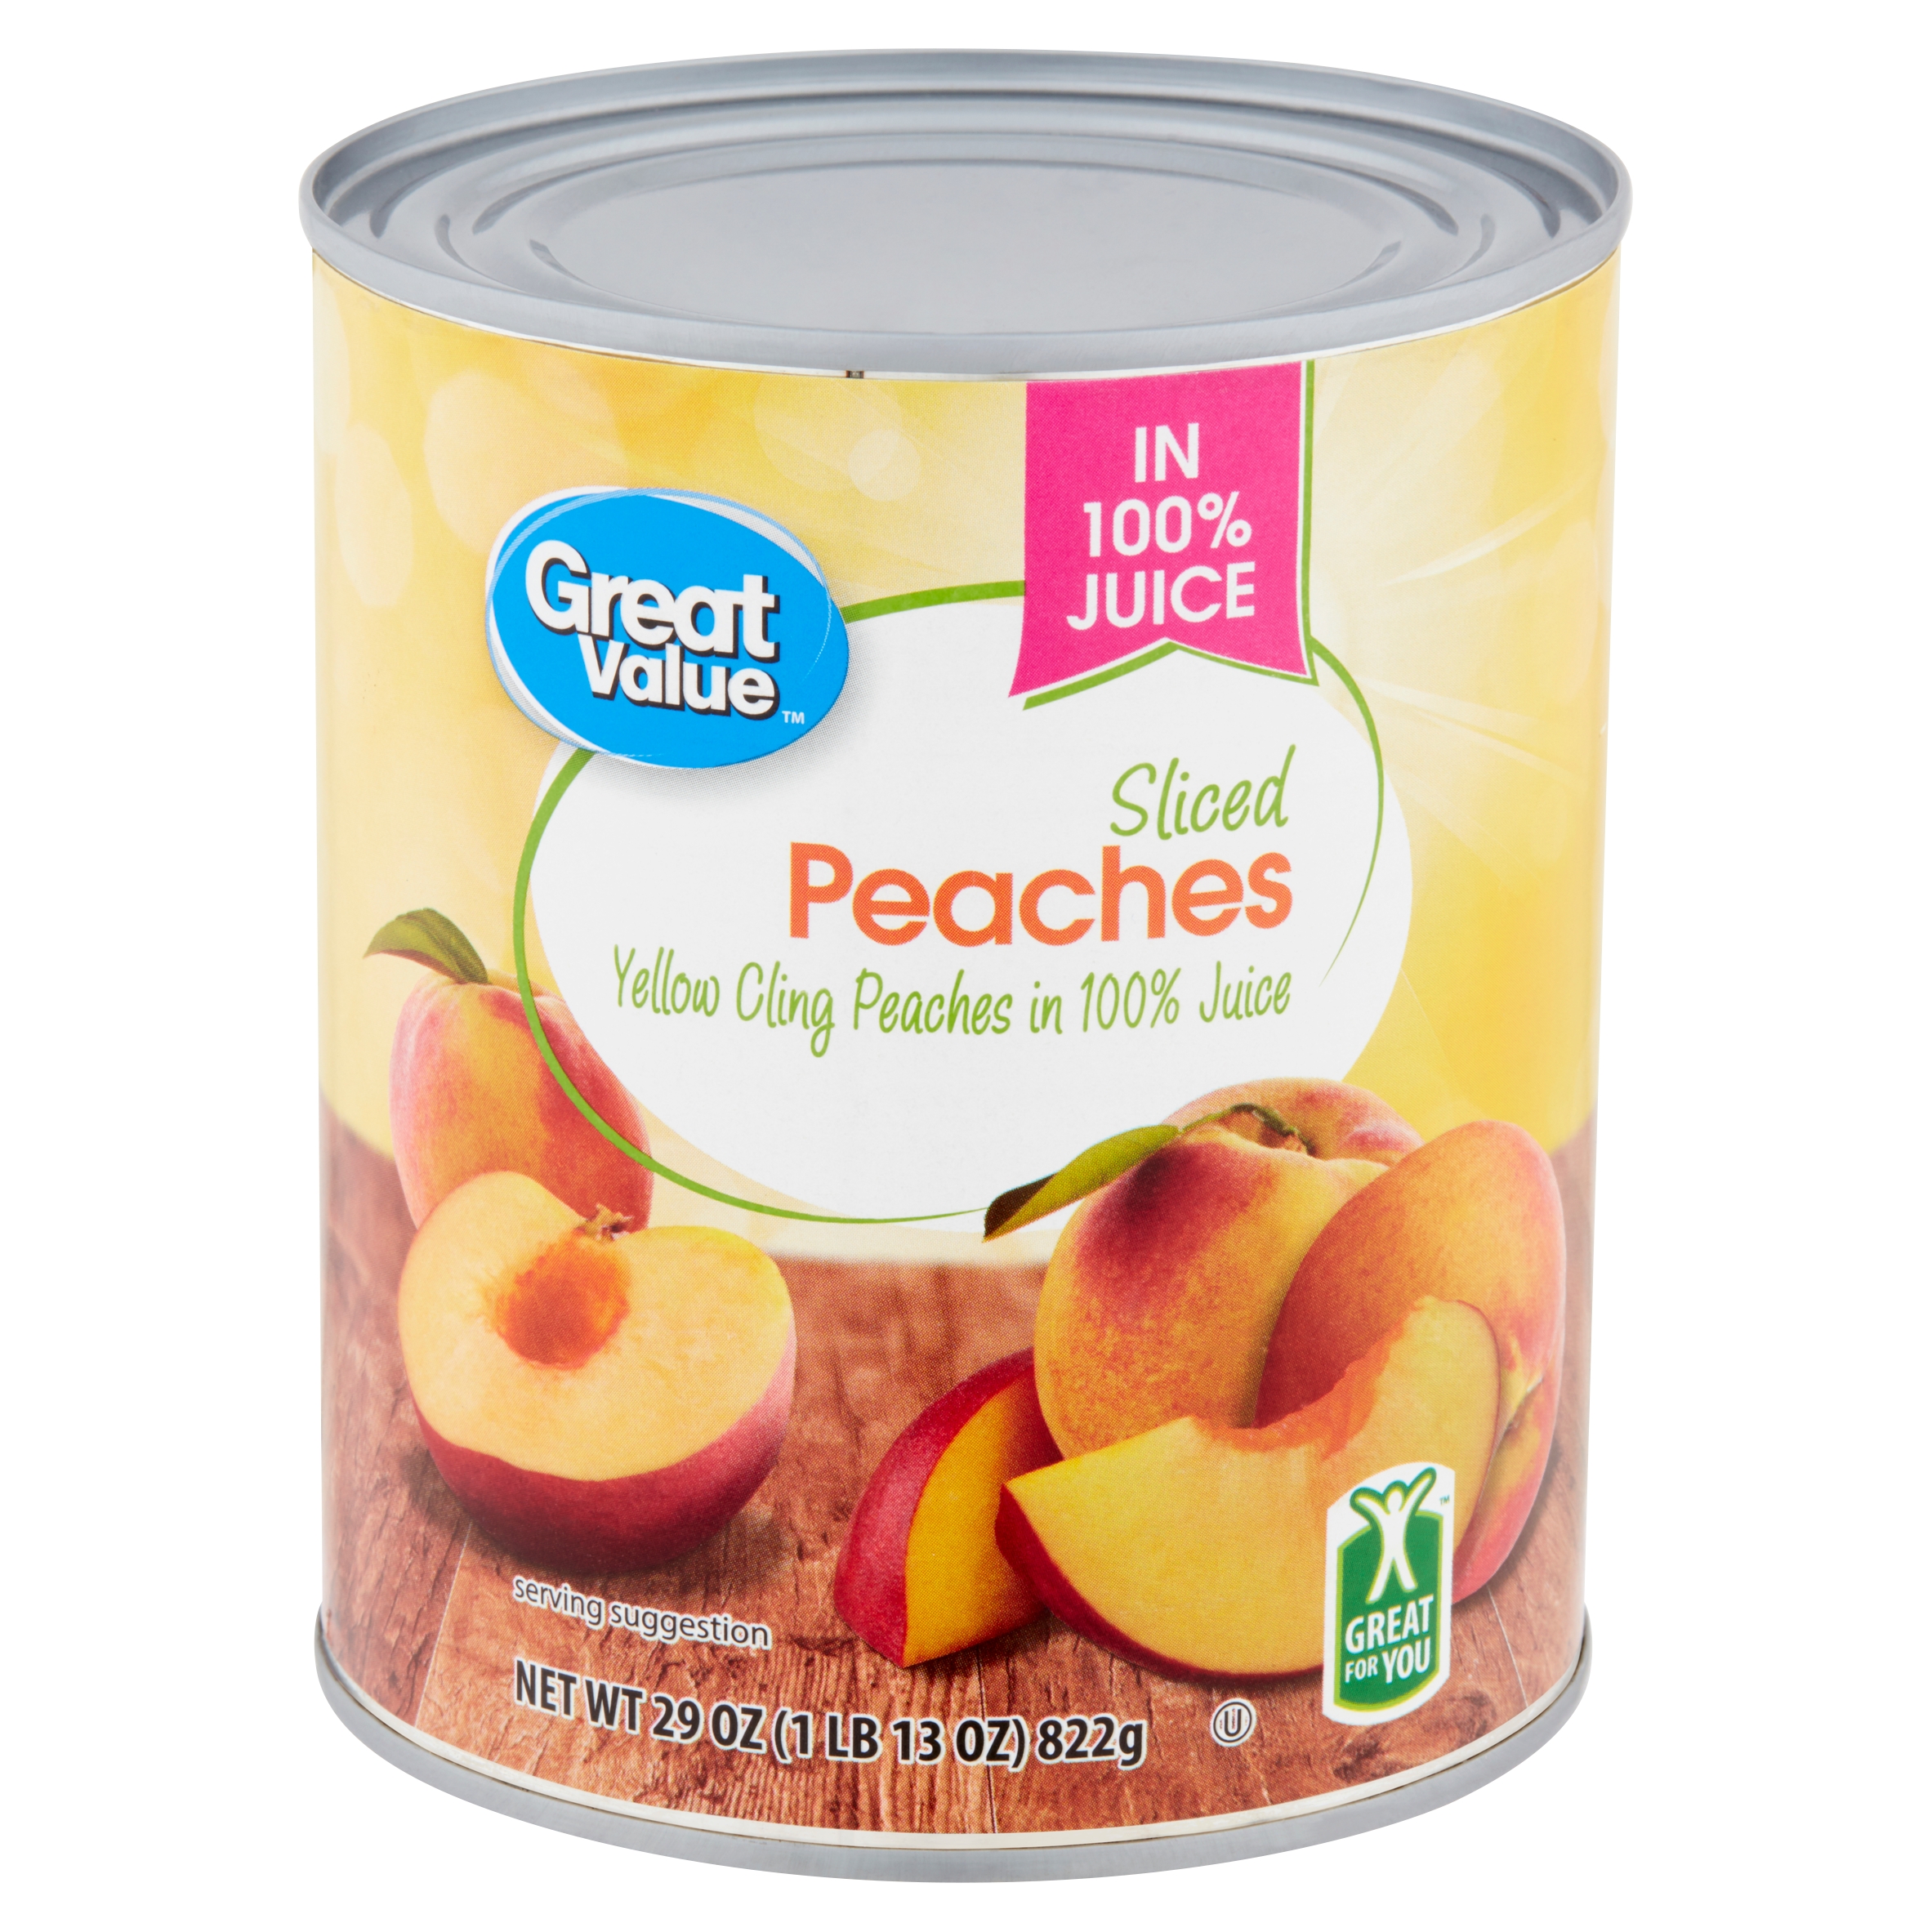 Great Value Sliced Peaches in 100% Juice, 29 Oz Image